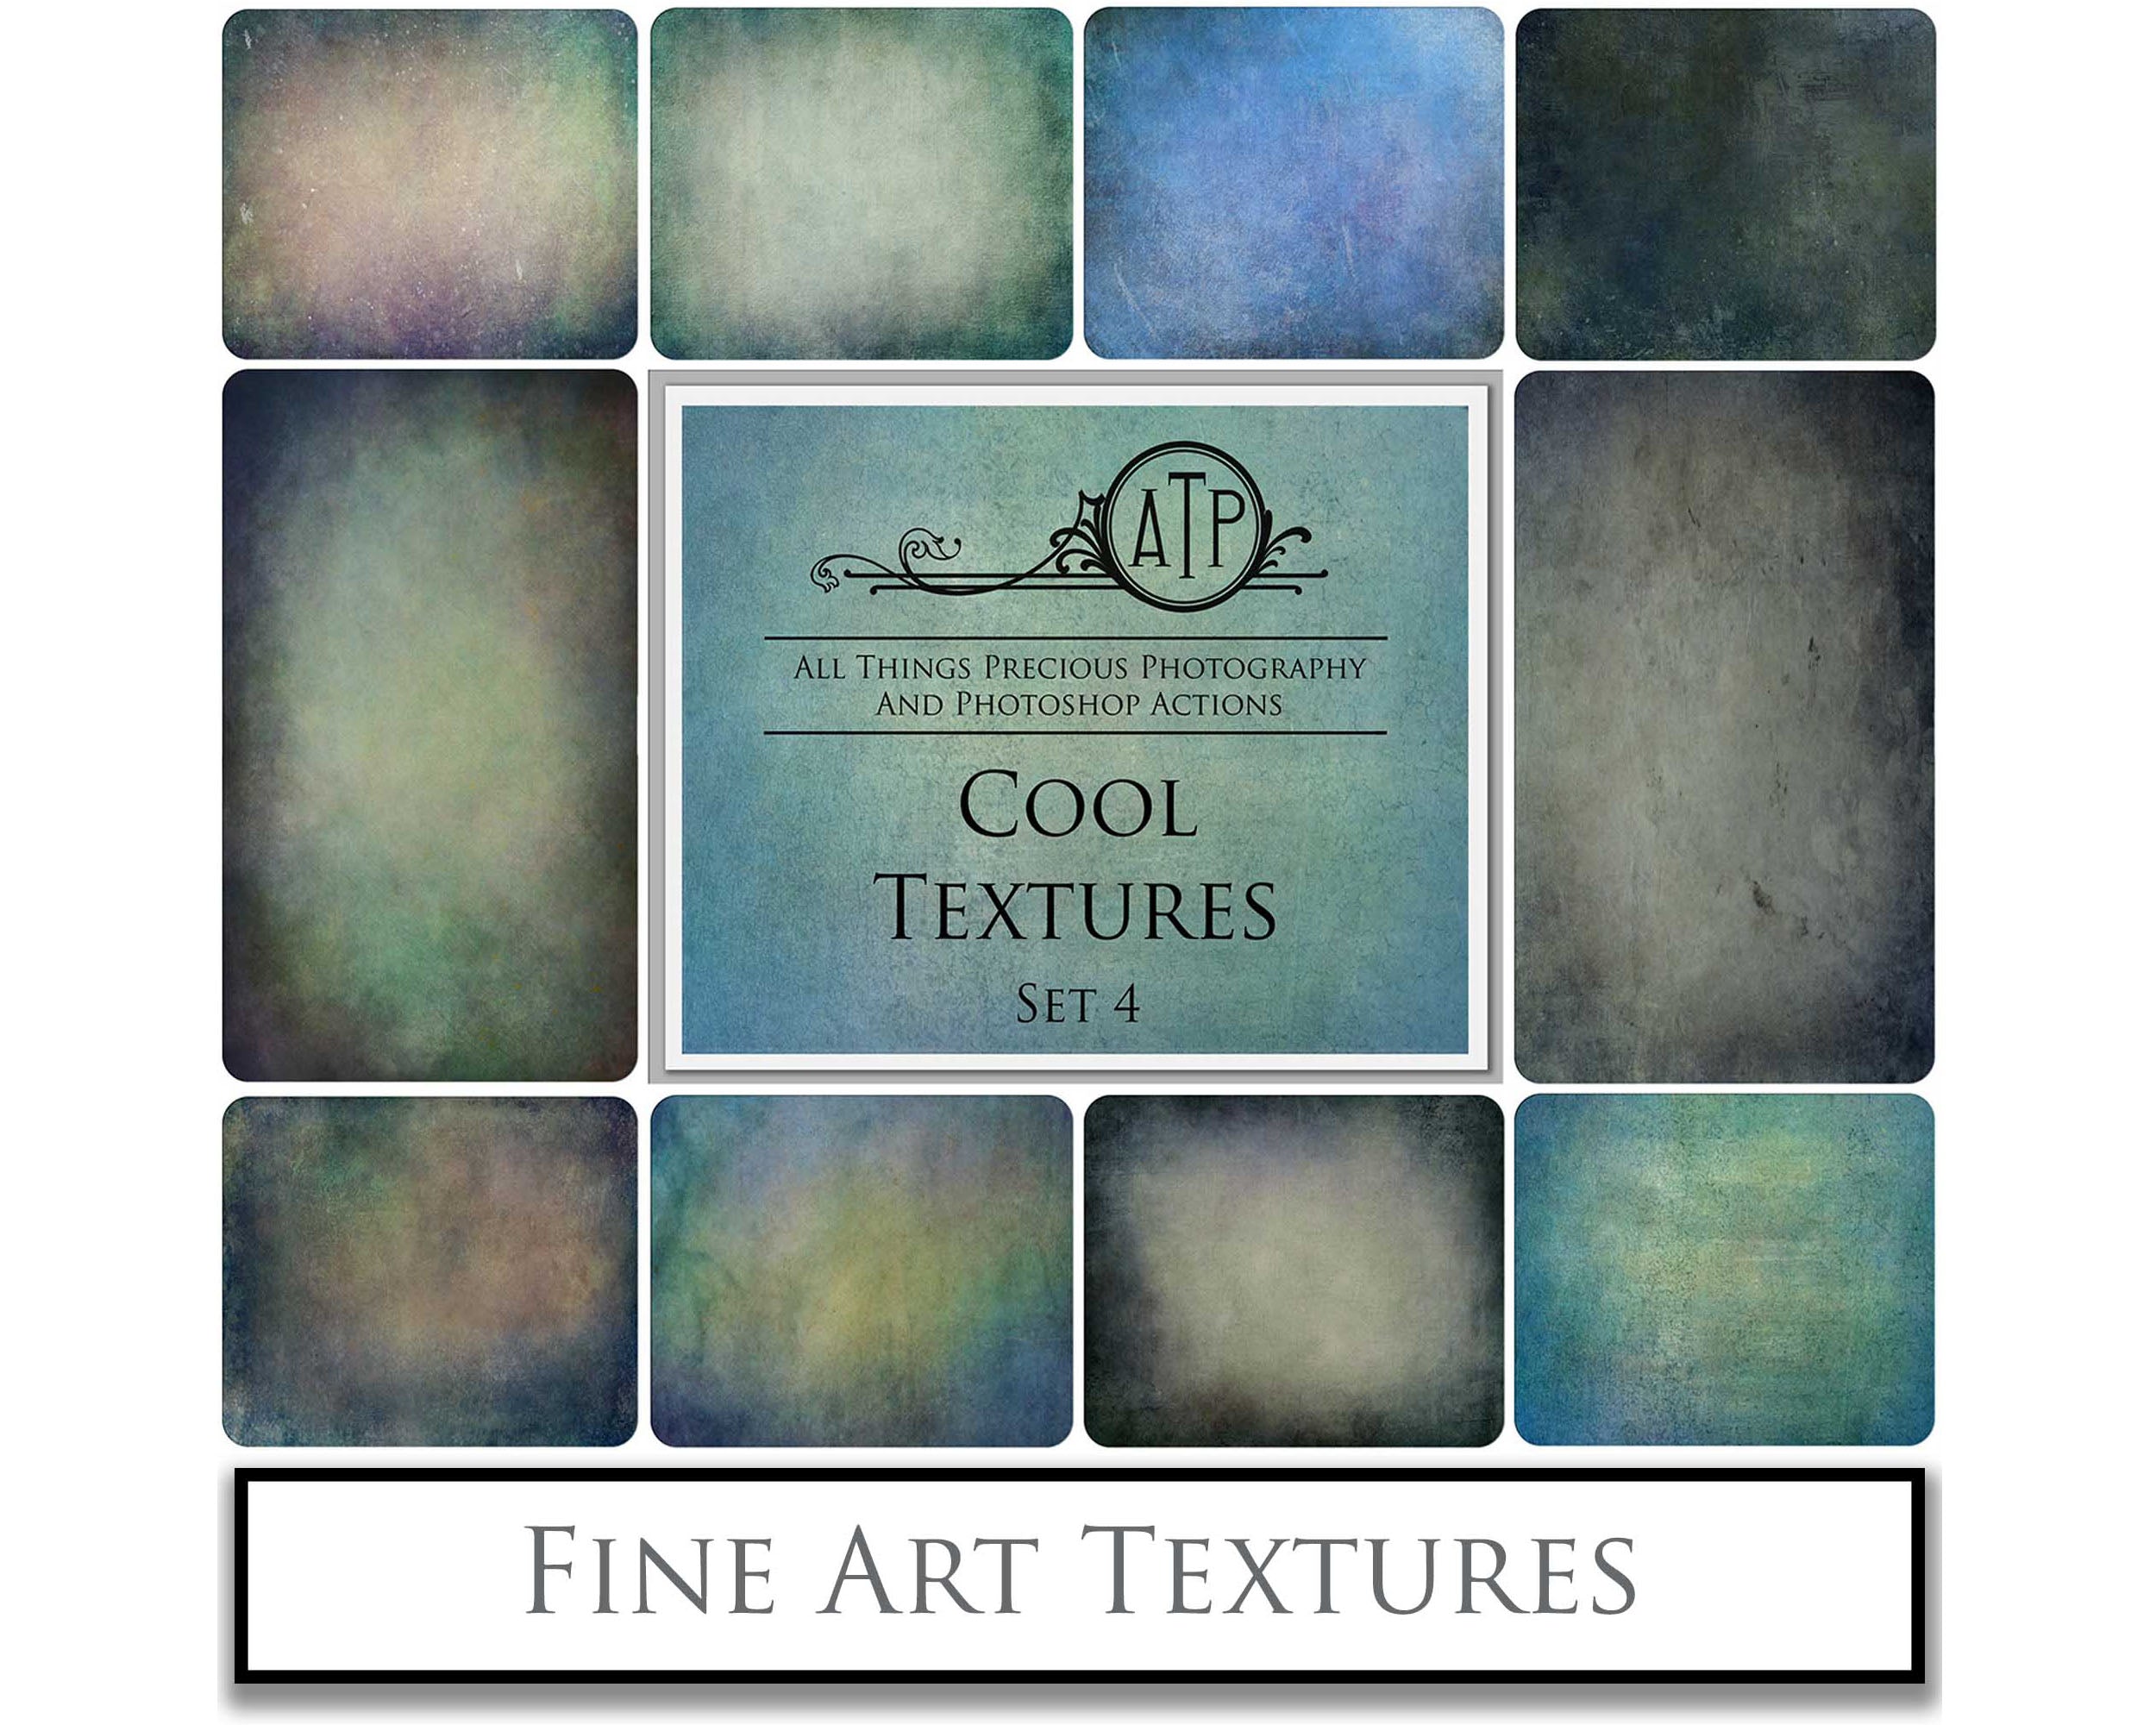 Fine Art Textures for photographers and digital editing. Photo Overlays. Antique, Vintage, Grunge, Light, Dark Variety Bundle.  Textured printable Canvas, Colour, Monochrome, Bundle. High resolution, 300dpi Graphic Assets for photography, digital scrapbooking and design. By ATP Textures